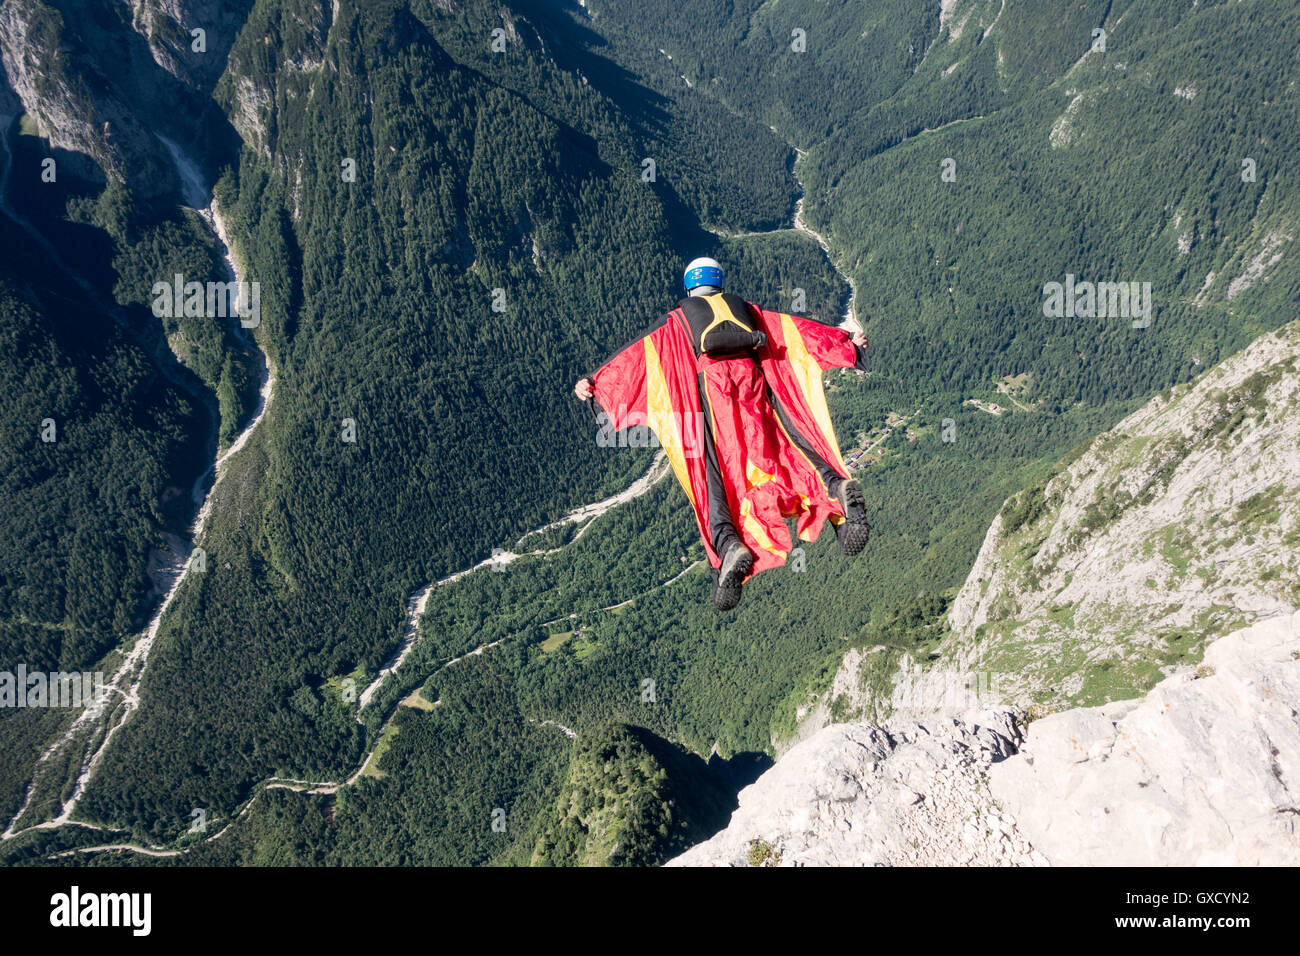 Wingsuit BASE jumper is flying down, Italian Alps, Alleghe, Belluno, Italy Stock Photo